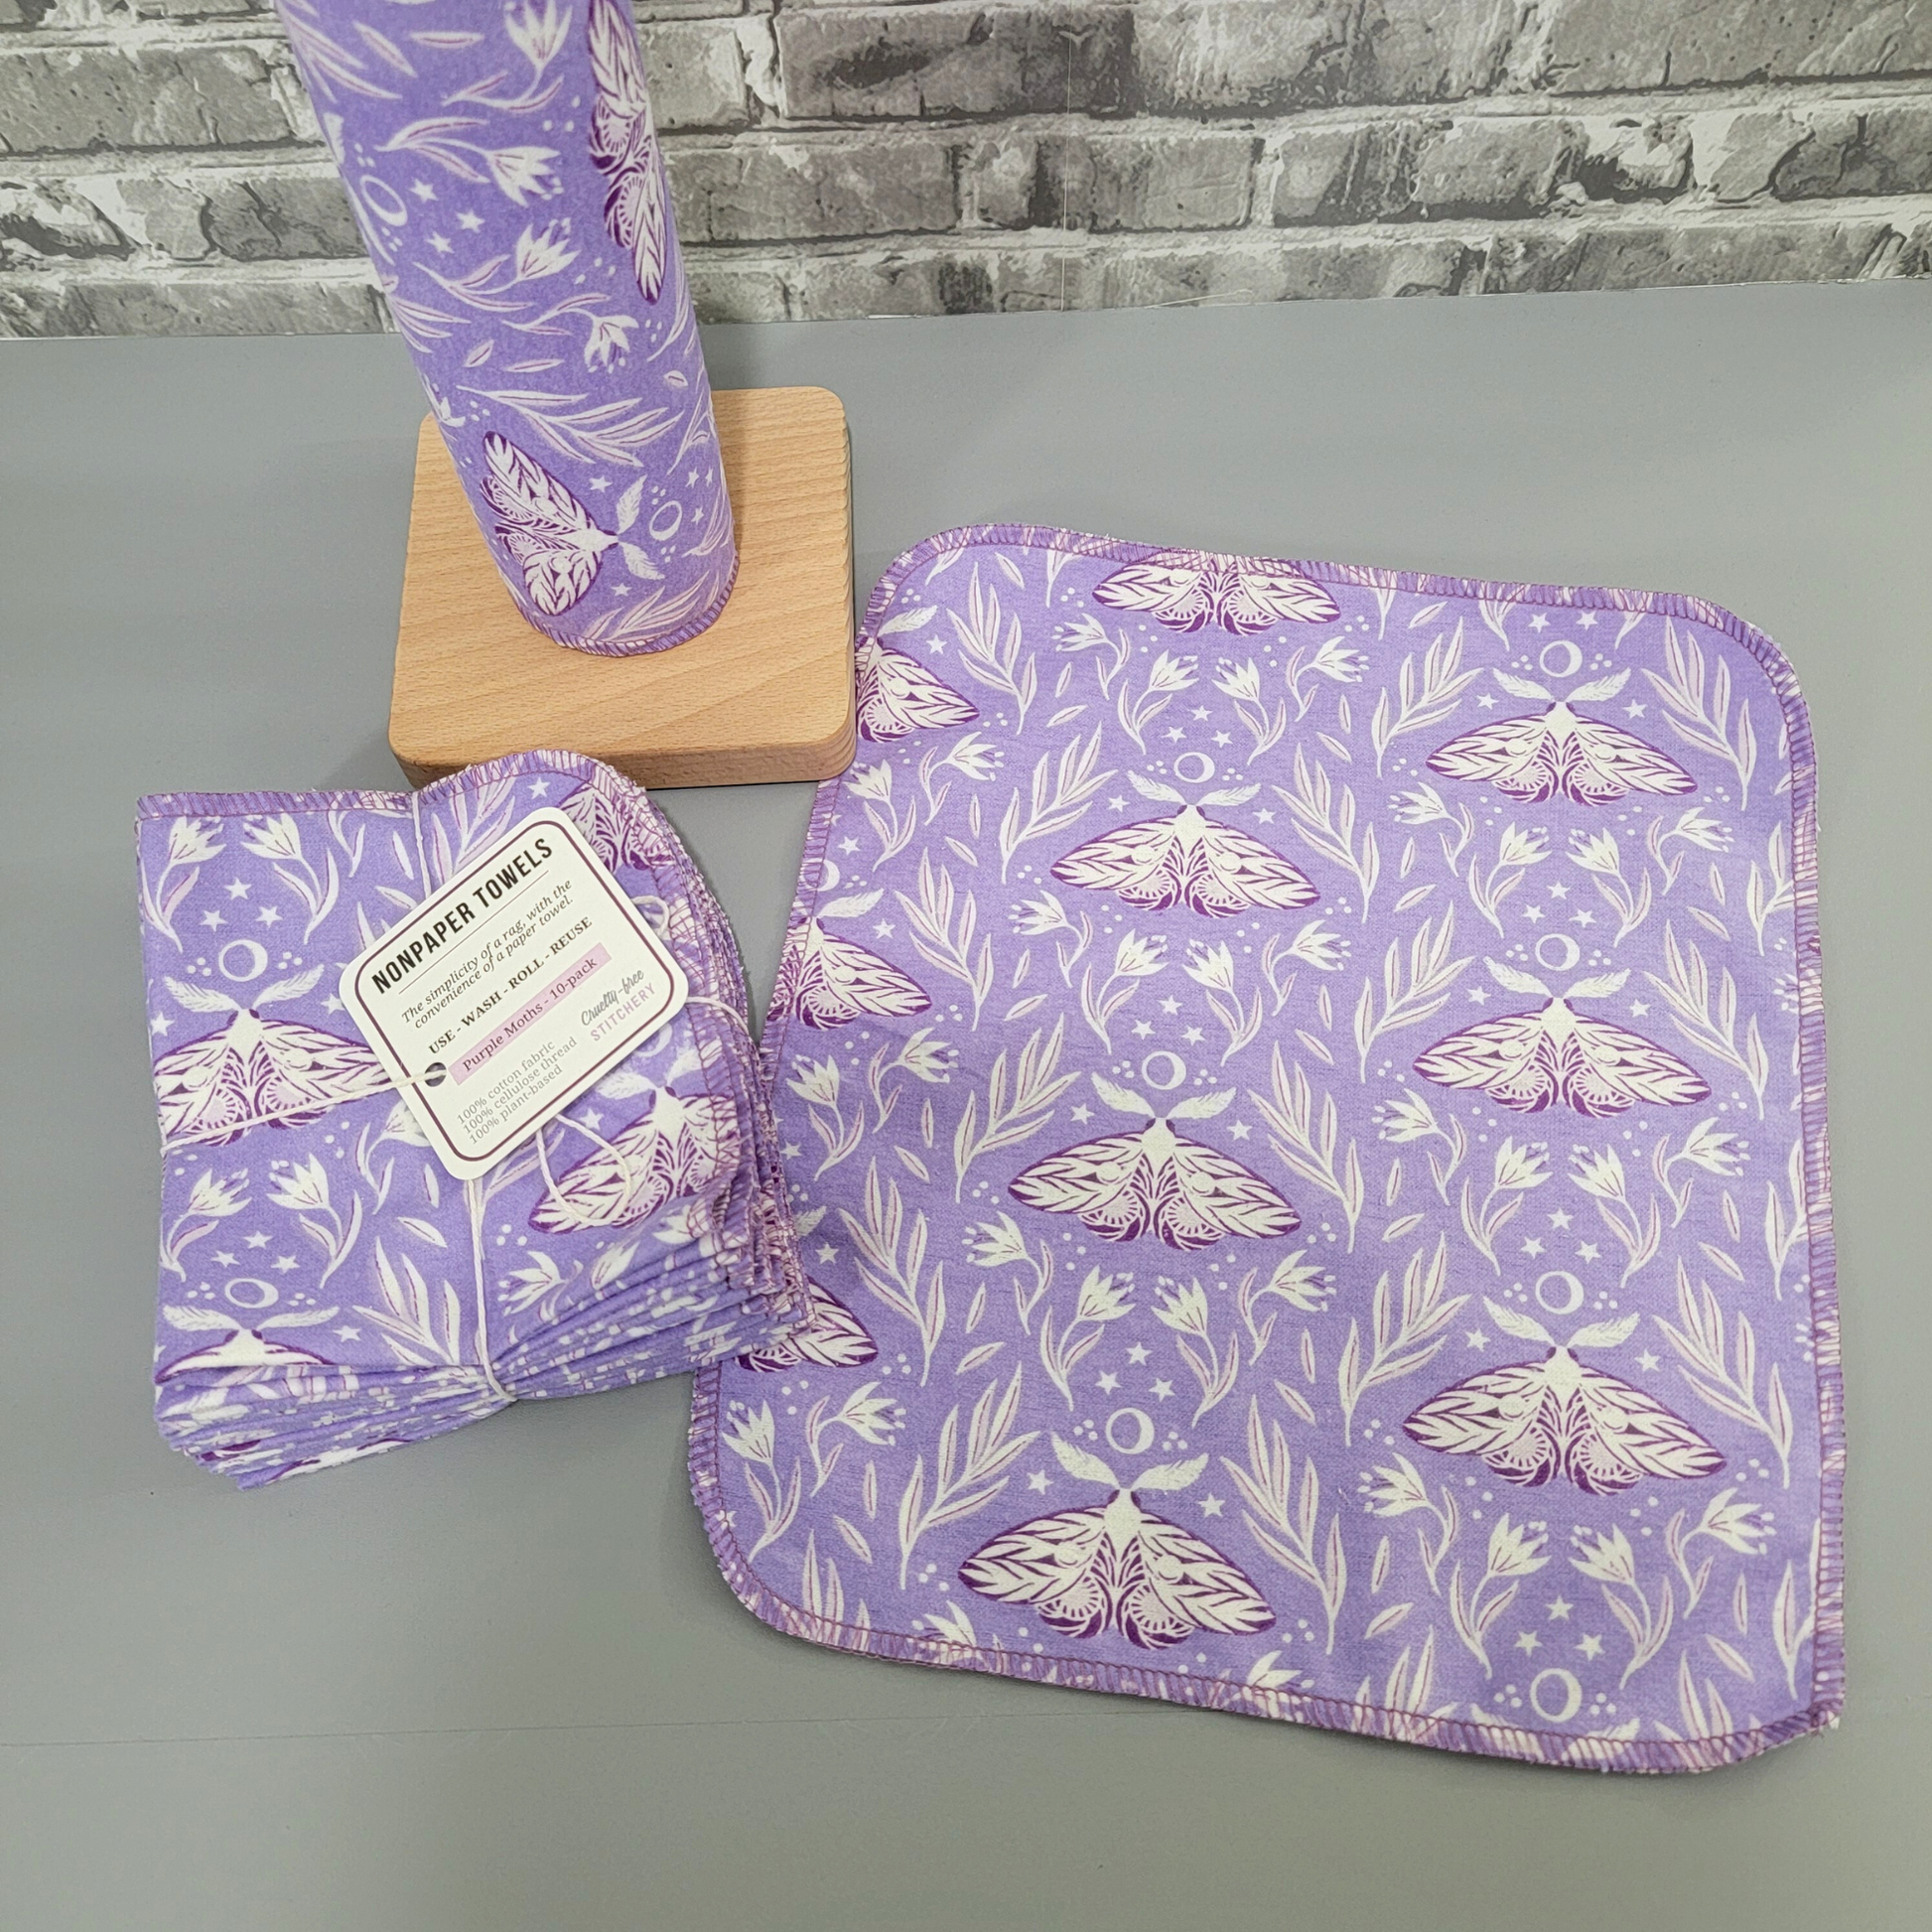 A full purple moths NonPaper Towel laid flat to show the design, next to the bundled pack and the wooden paper towel holder.